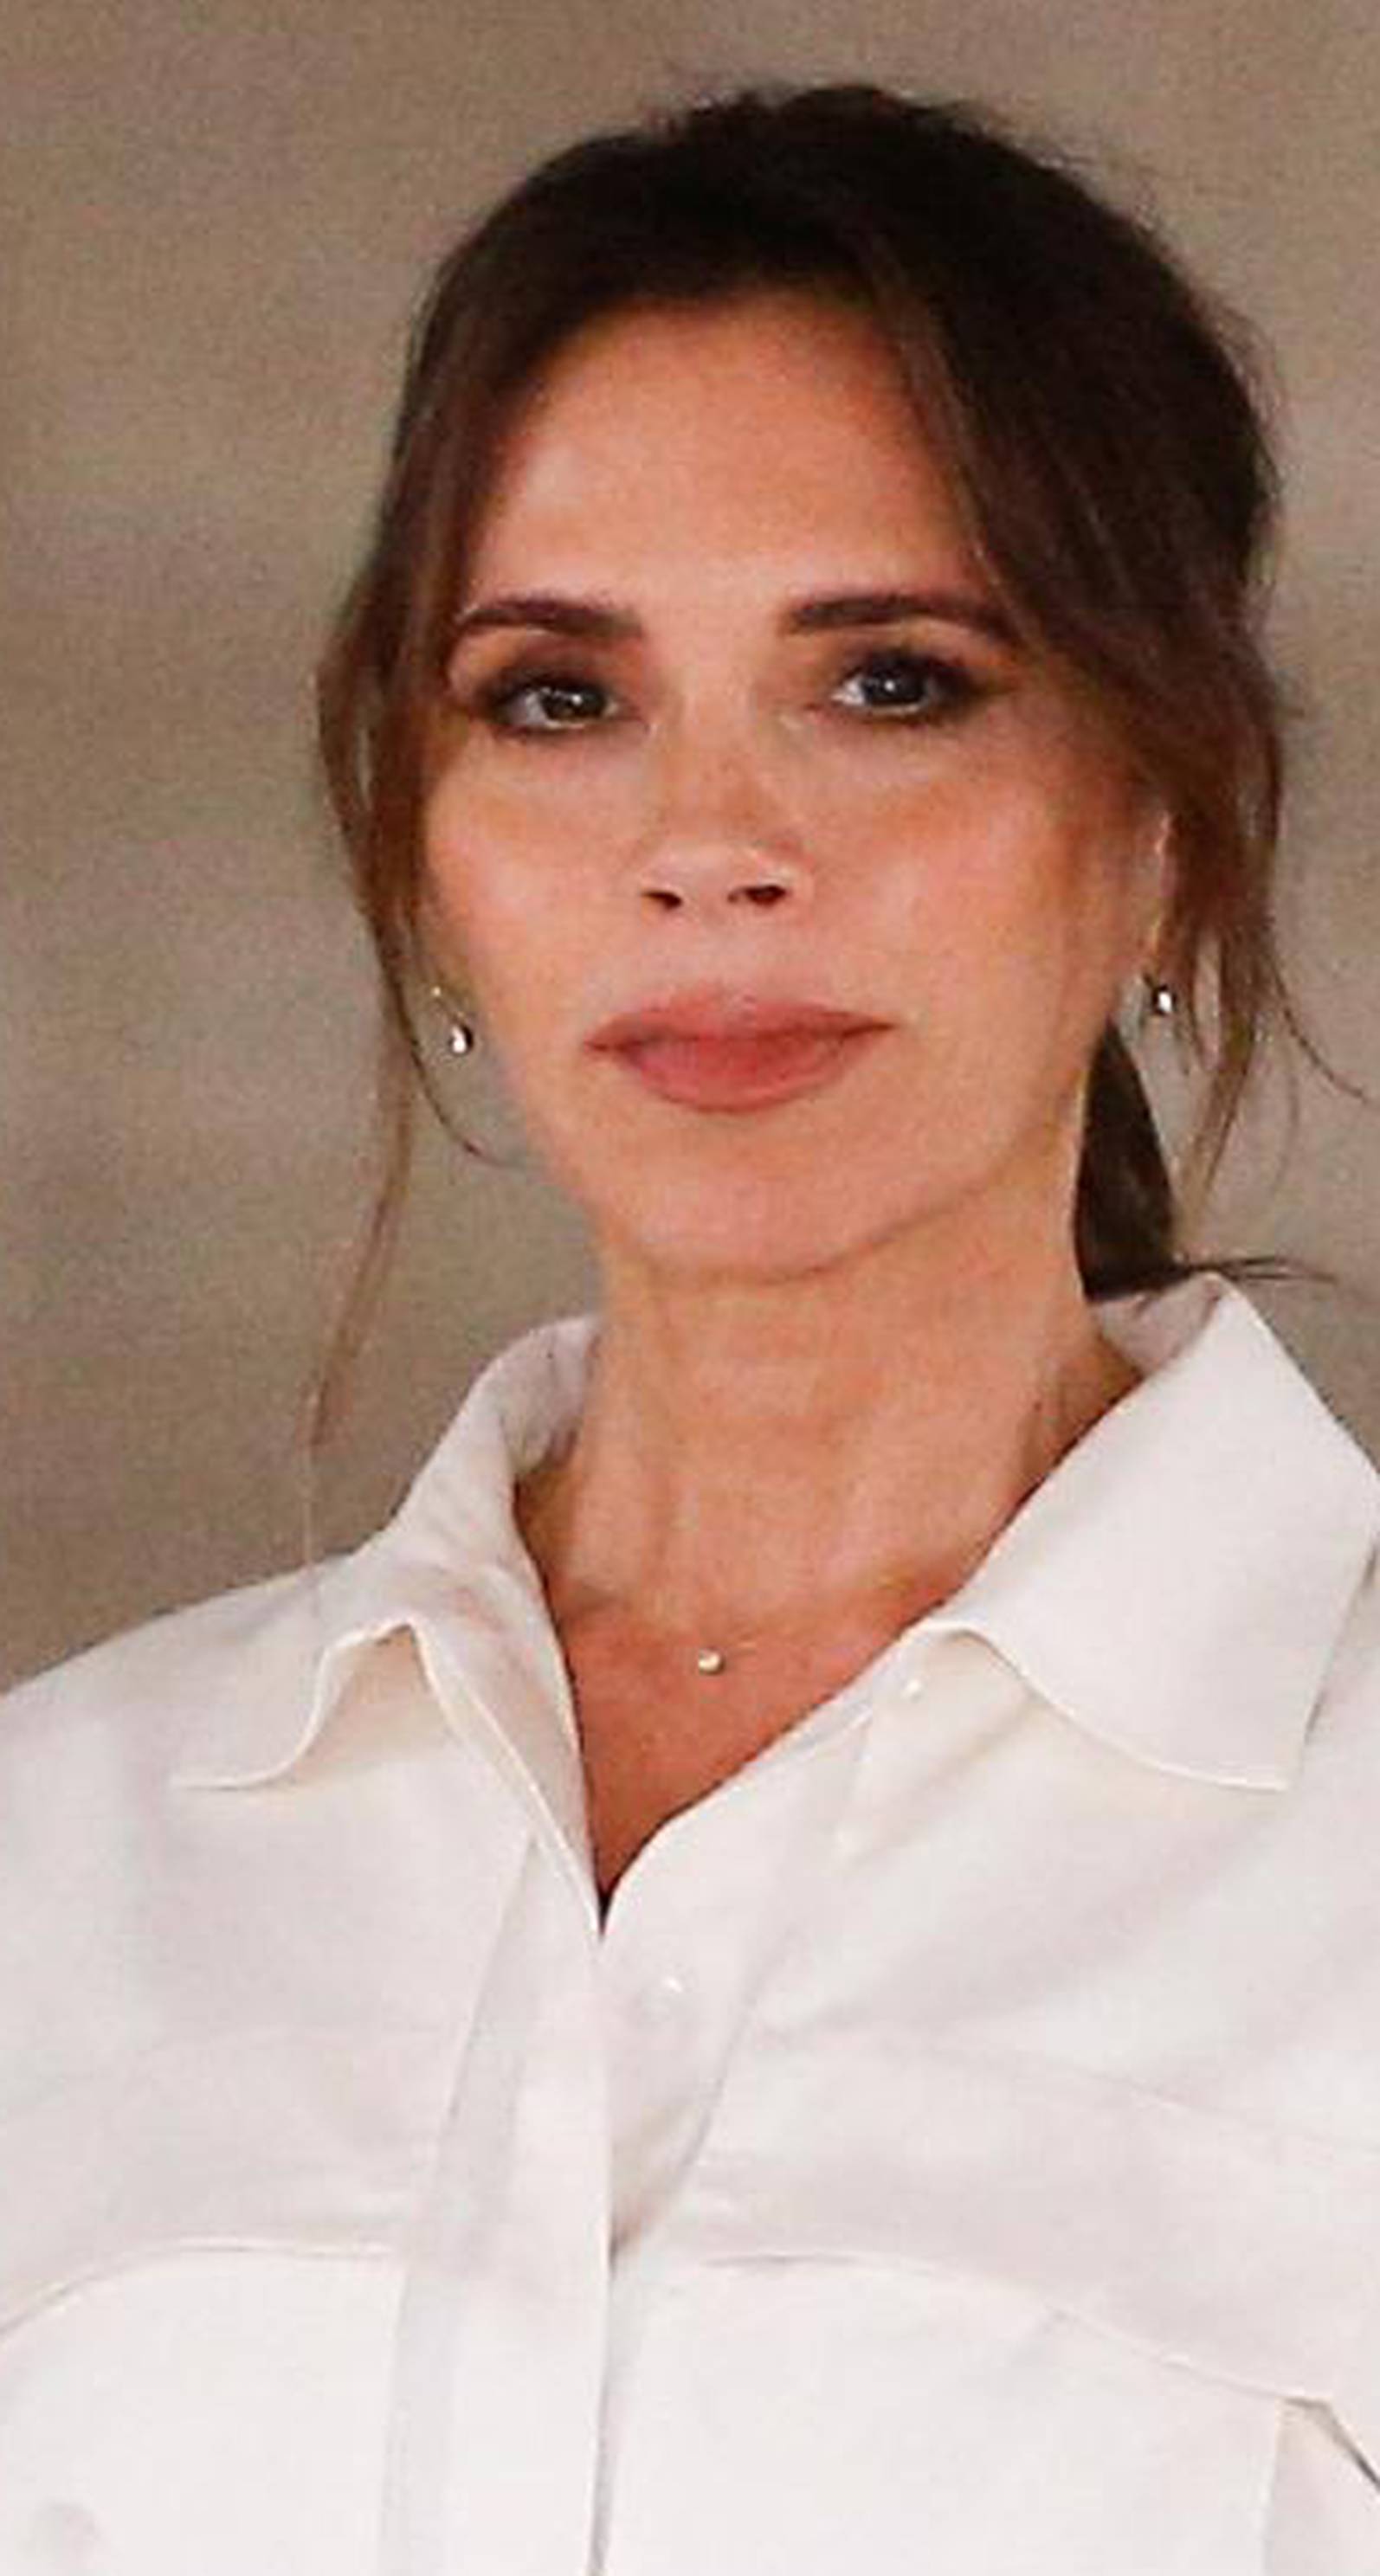 Designer Victoria Beckham at the end of her catwalk show during London Fashion Week in London